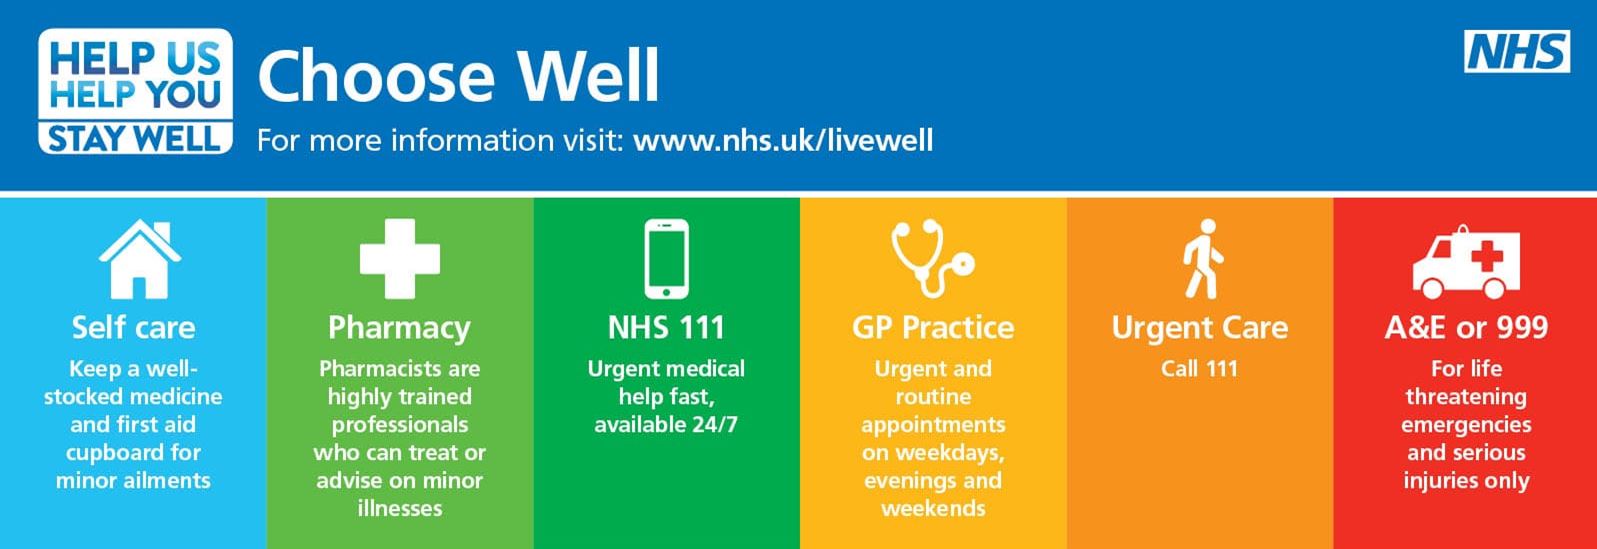 ChooseWell